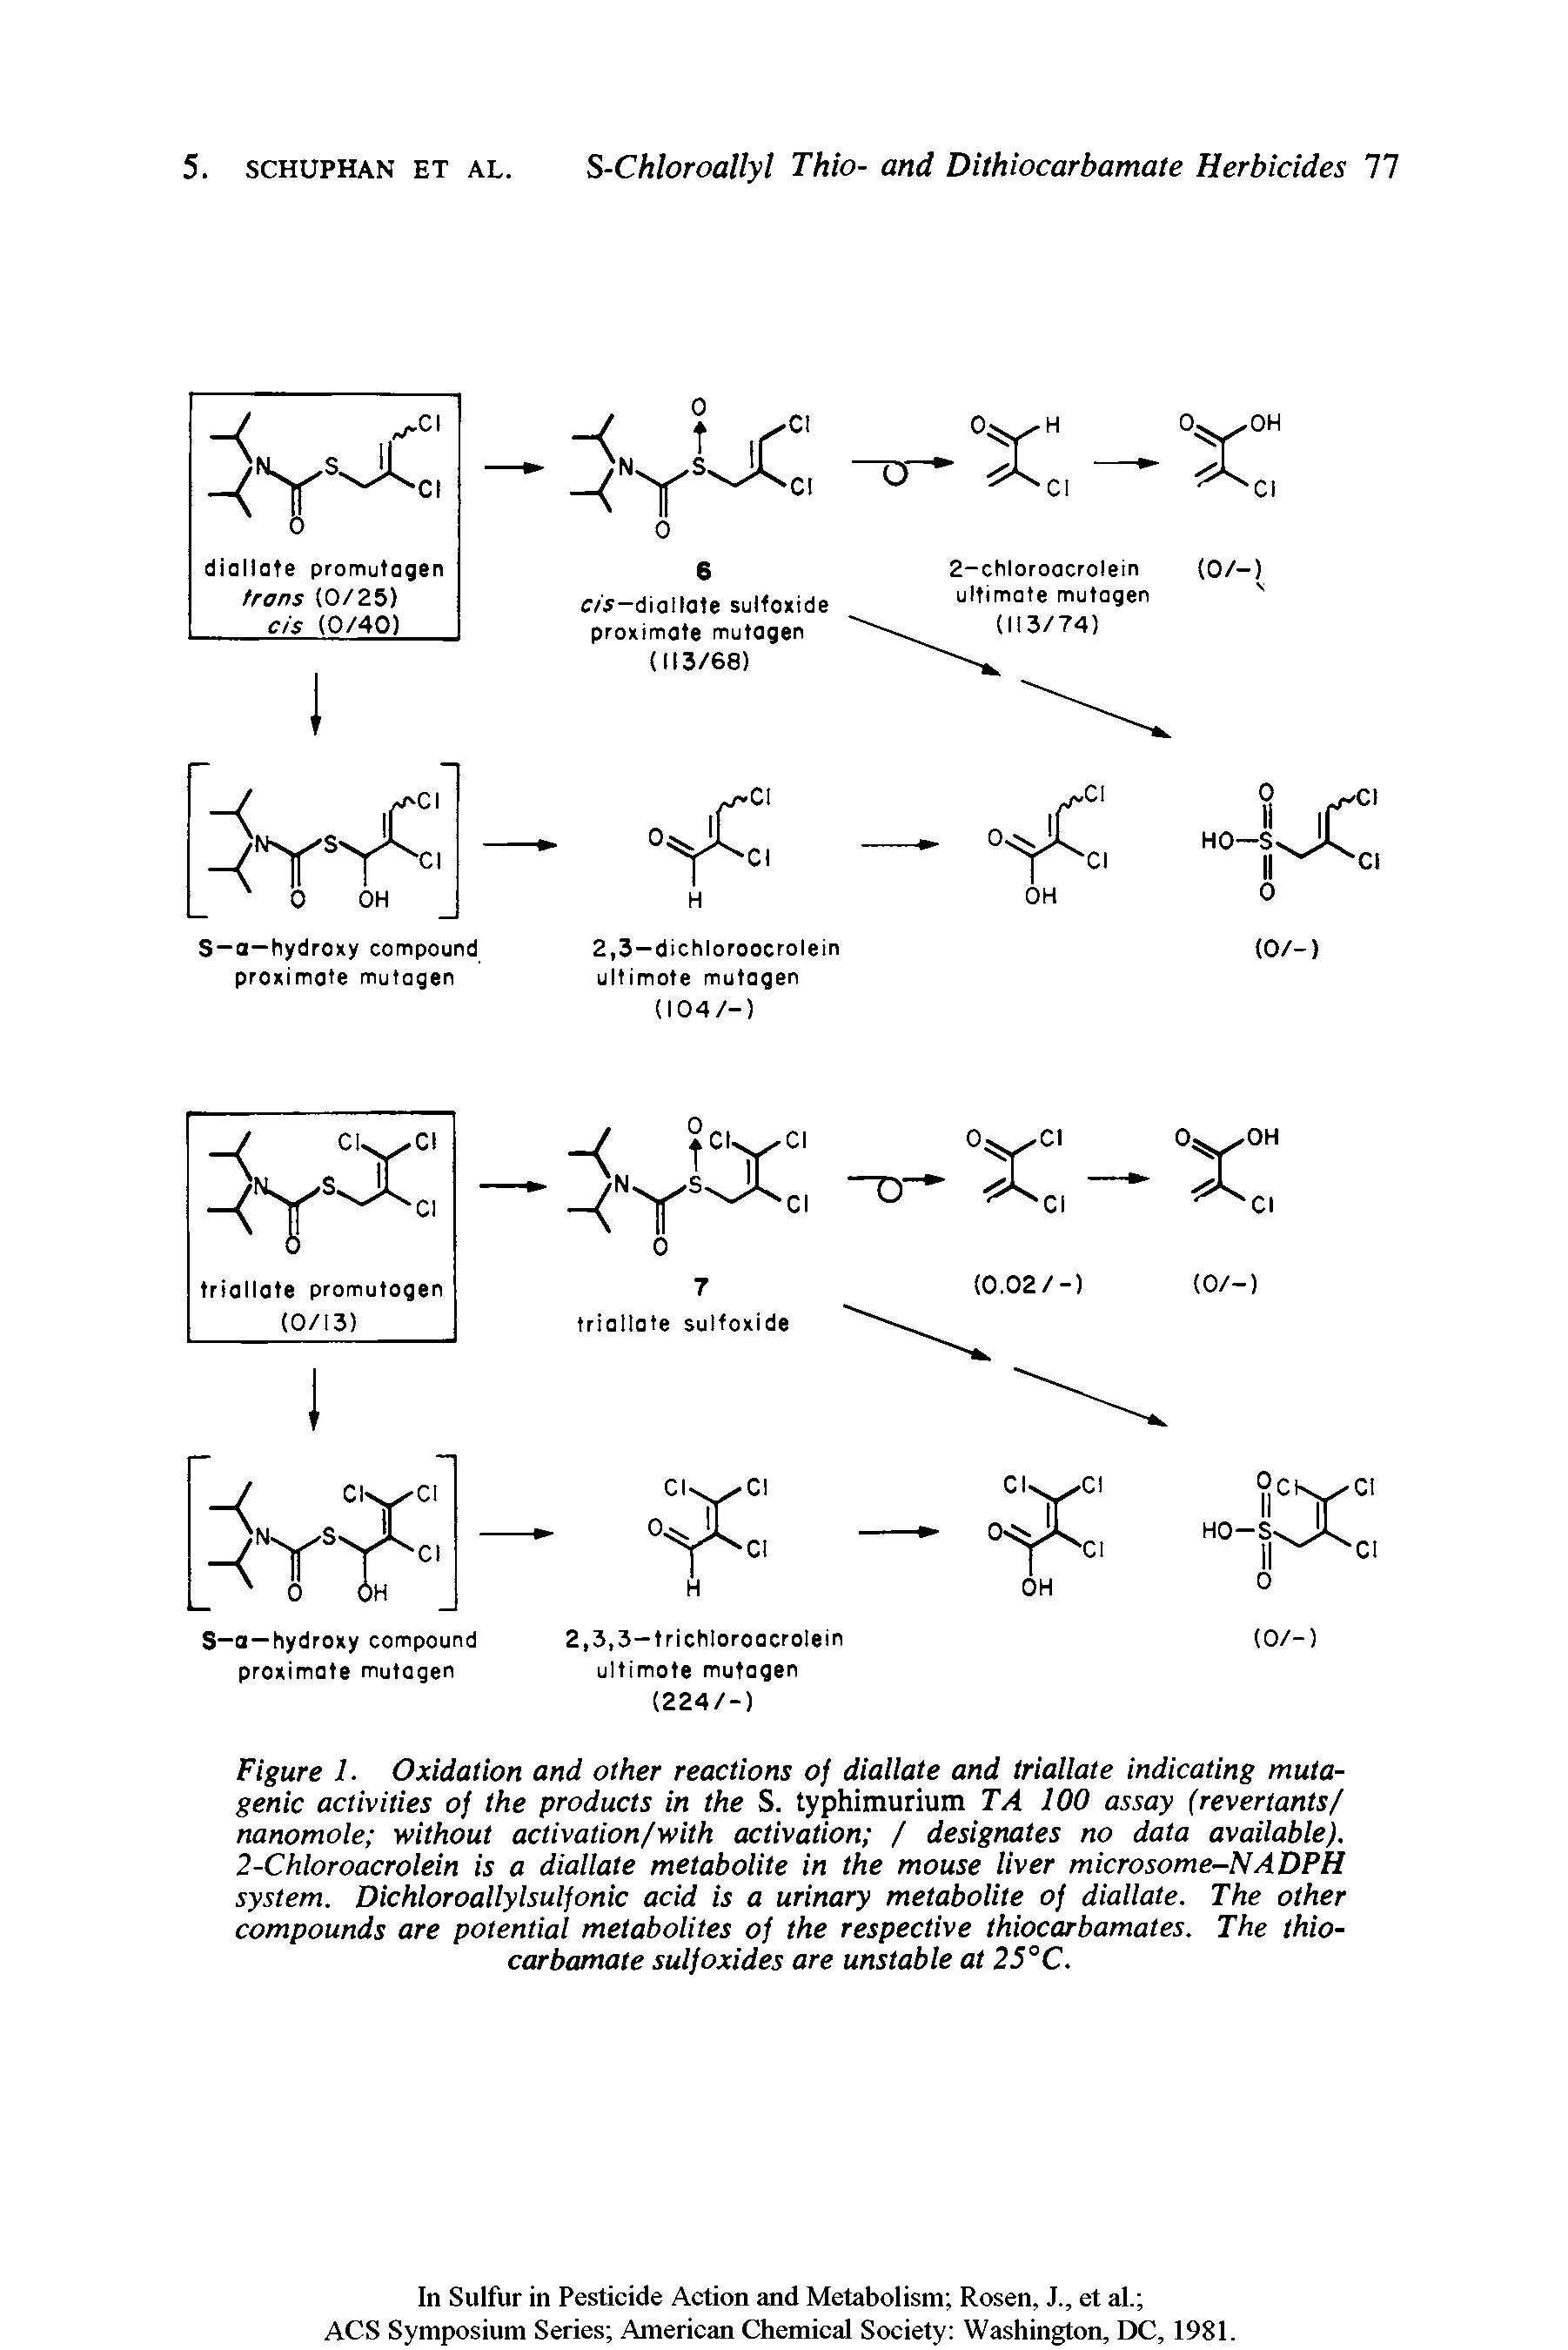 Figure 1. Oxidation and other reactions of dialiate and triallate indicating mutagenic activities of the products in the S. typhimurium TA 100 assay (revertants/ nanomole without activation/with activation / designates no data available). 2-Chloroacrolein is a dialiate metabolite in the mouse liver microsome-NADPH system. Dichloroallylsulfonic acid is a urinary metabolite of dialiate. The other compounds are potential metabolites of the respective thiocarbamates. The thio-carbamate sulfoxides are unstable at 25°C.